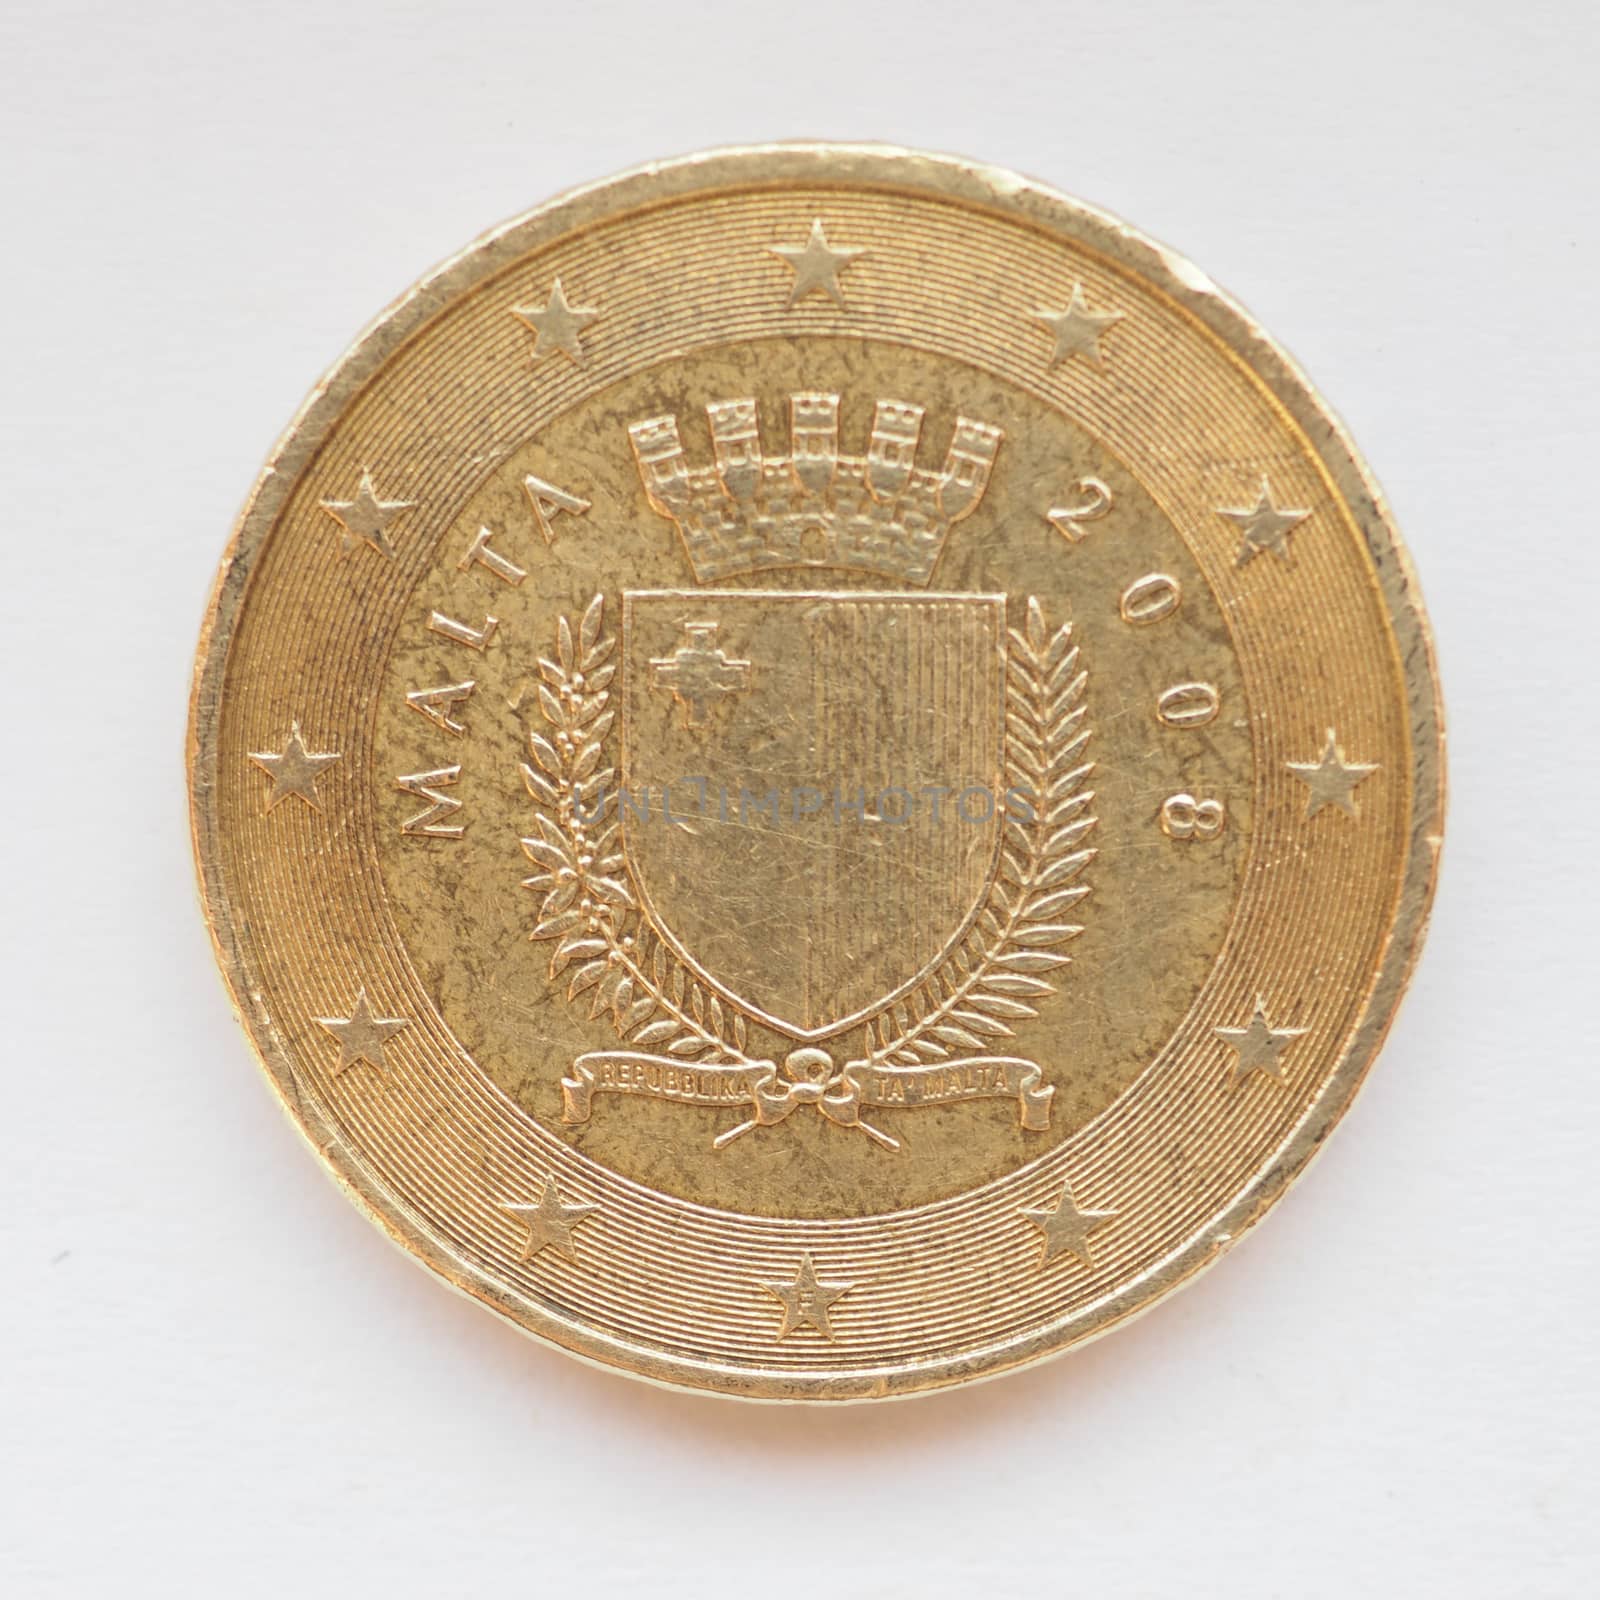 Maltese 50 Euro cent coin from Malta Currency of the European Union